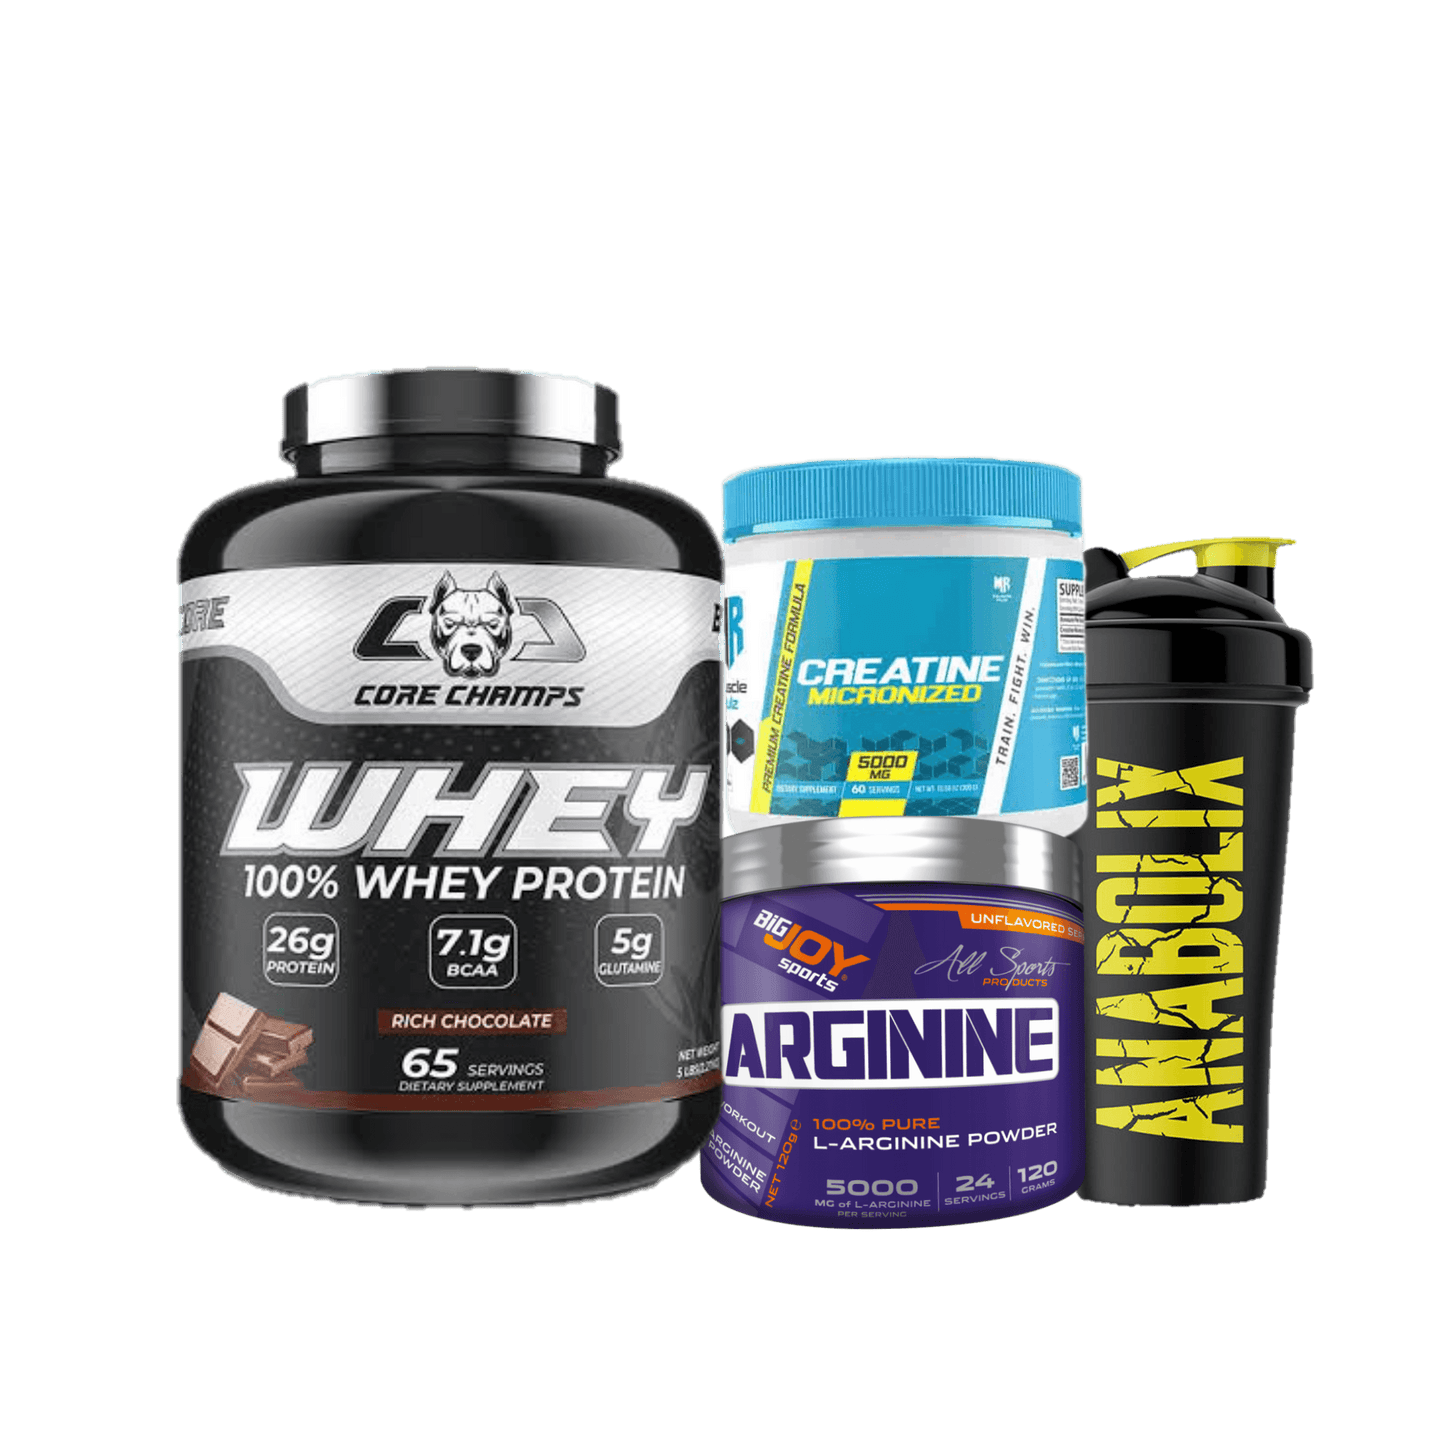 Core Champs Whey + Creatine + Arginine + Shaker - The Supplements Factory